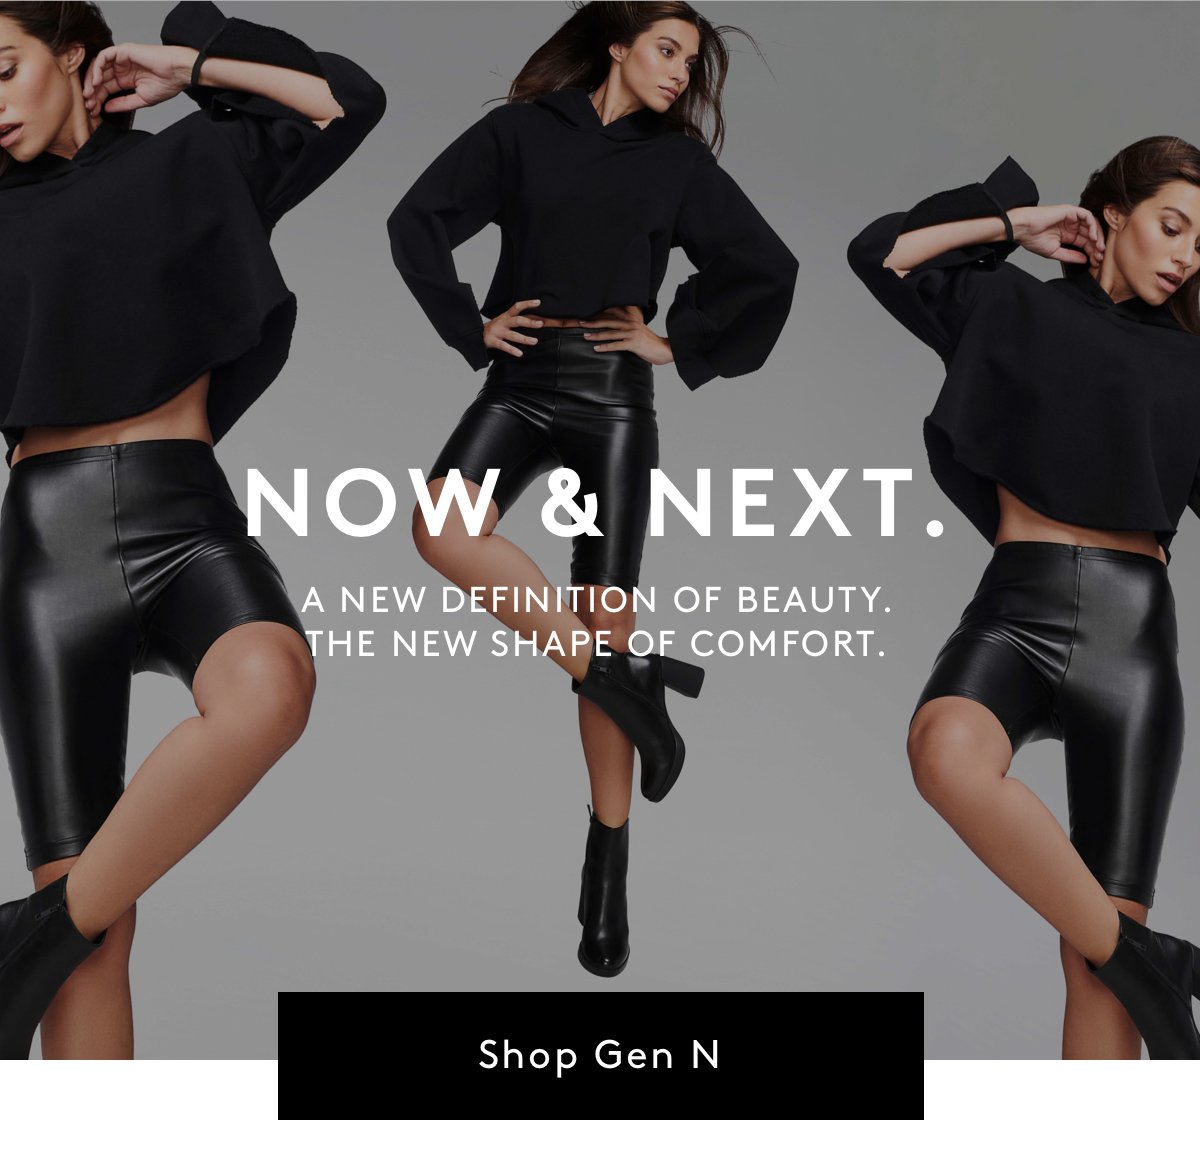 Now & Next. A new definition of beauty. The new shape of comfort. Shop Gen N